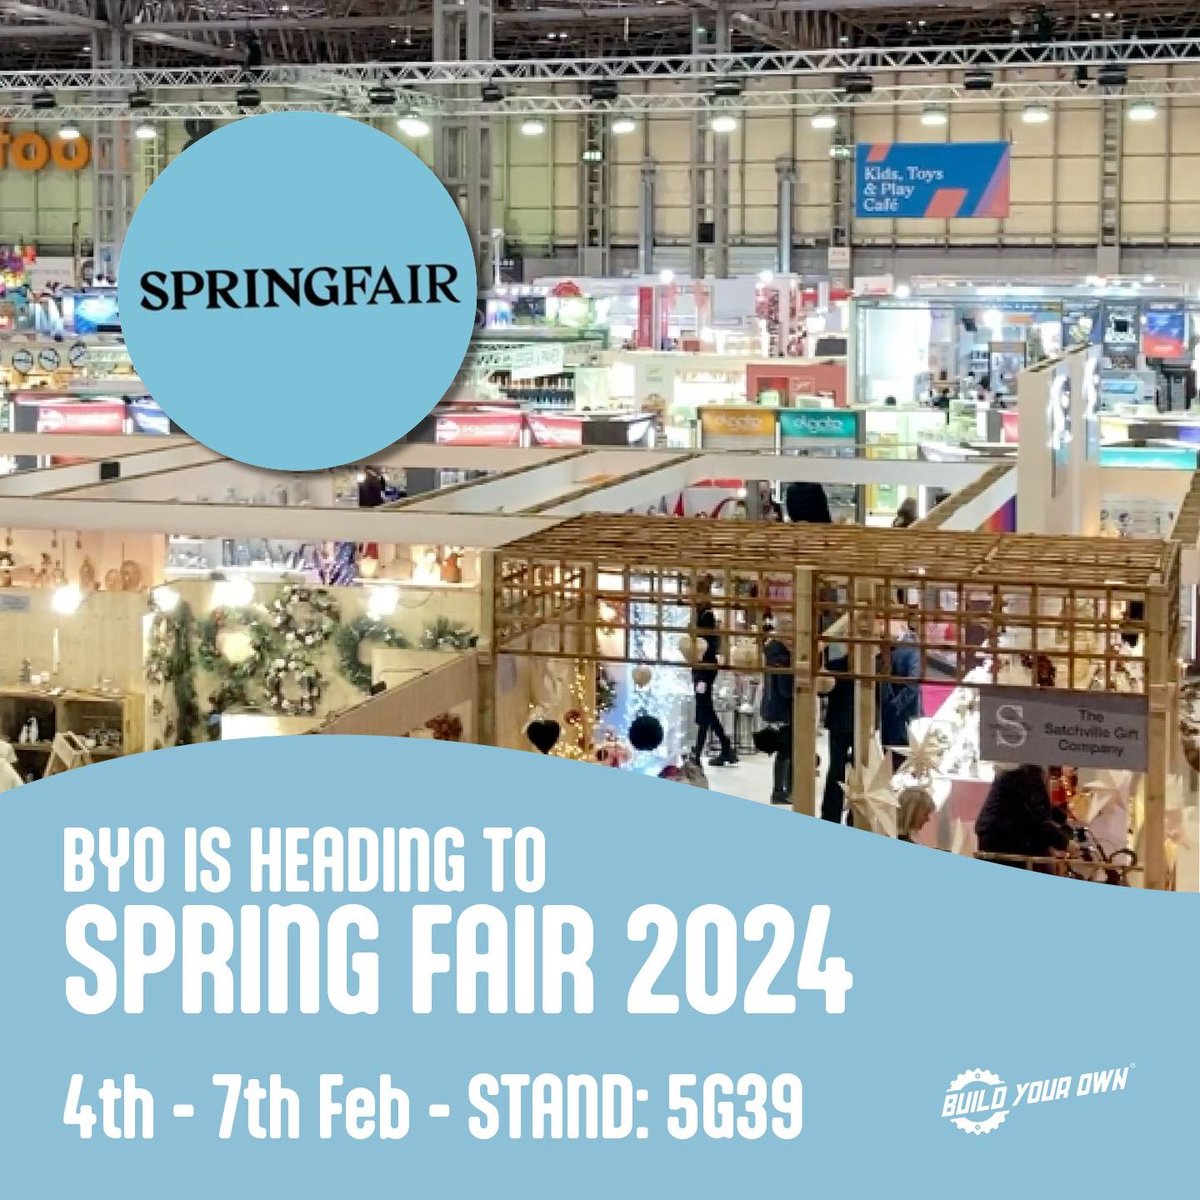 We’re heading to Spring Fair 2024 at the NEC, Birmingham this weekend! 🎉 We’ll be there Sun 4th – Wed 7th Feb - you’ll find us at Stand 5G39 – come and say hi! We’d love to meet you and to show you our exciting NEW kits for 2024! 😀 #byokits #SpringFair2024 #springautumnfair